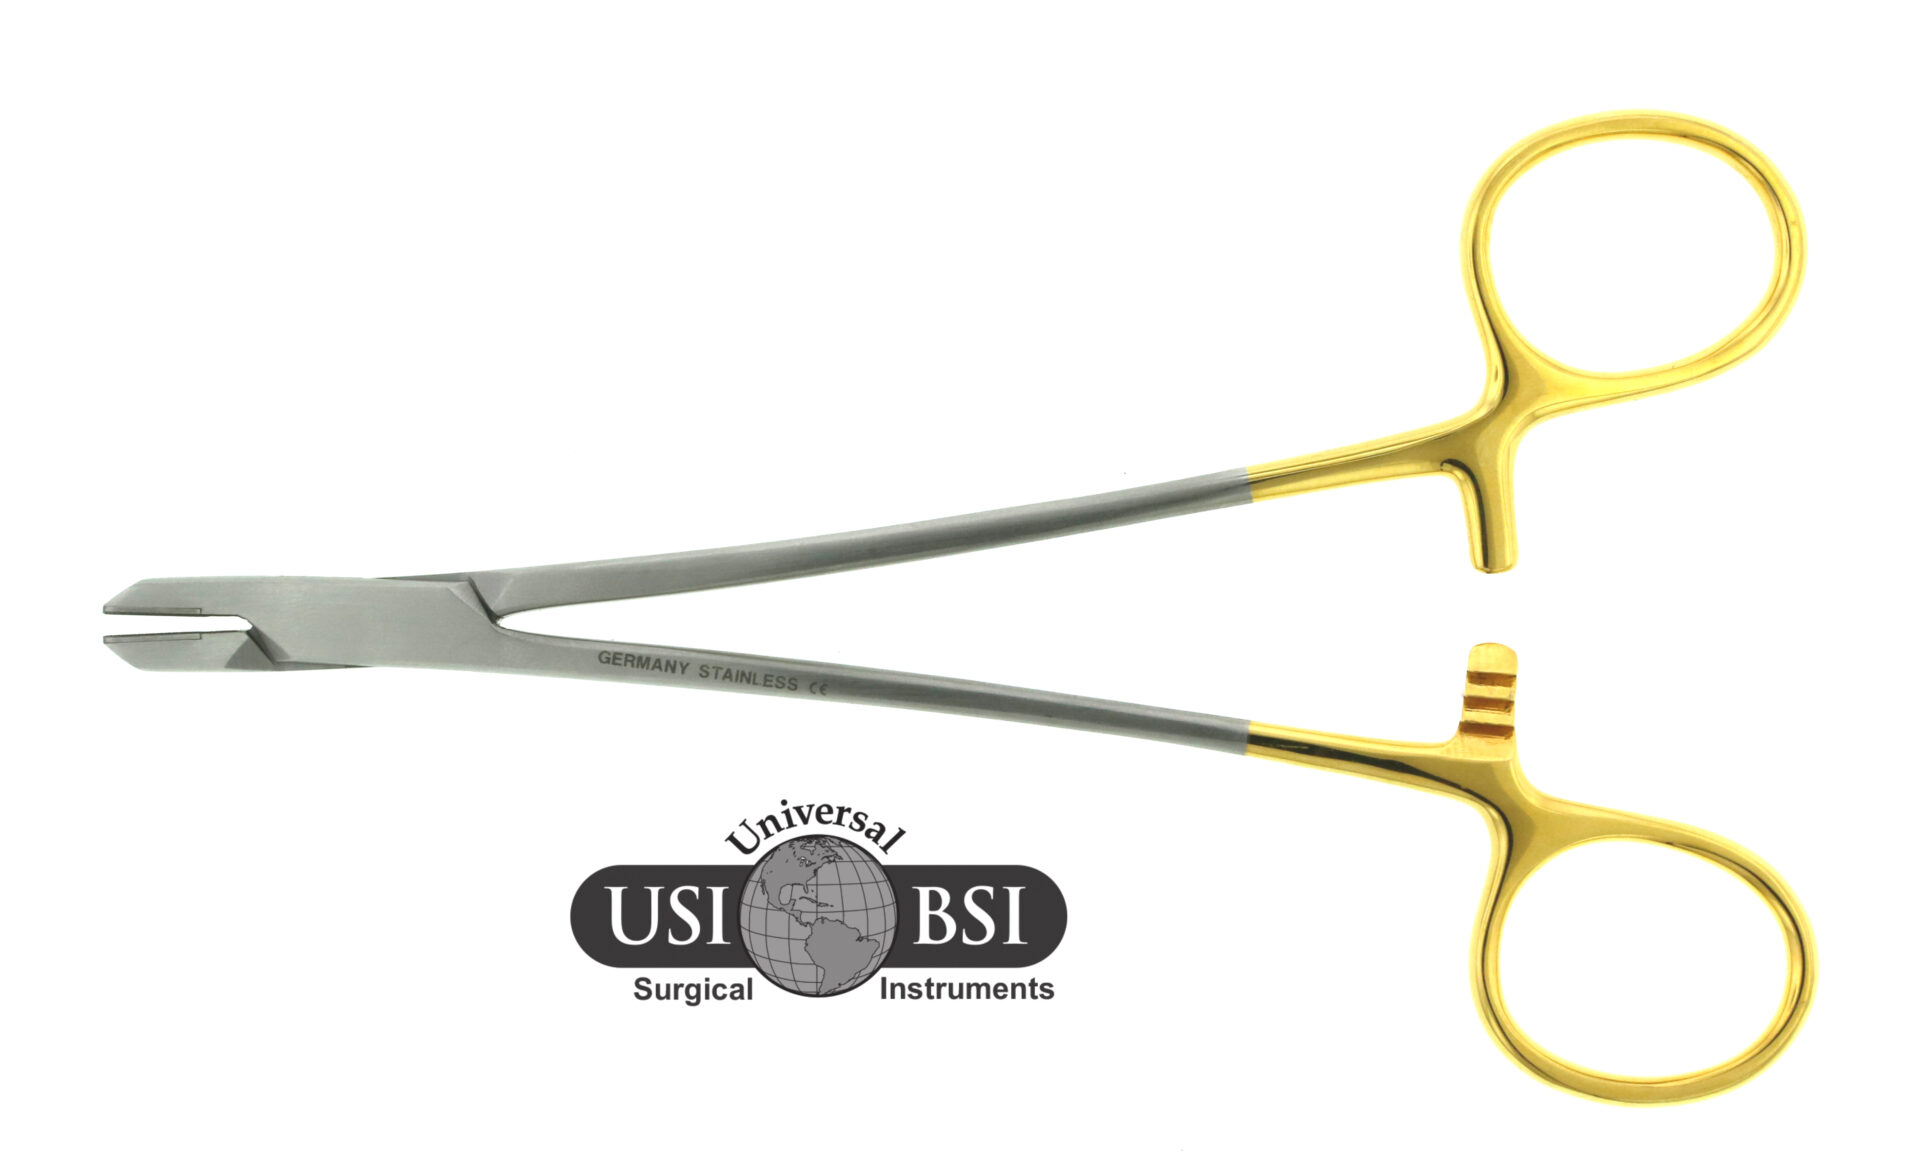 A pair of scissors with gold handles and a us 1 bsi logo.